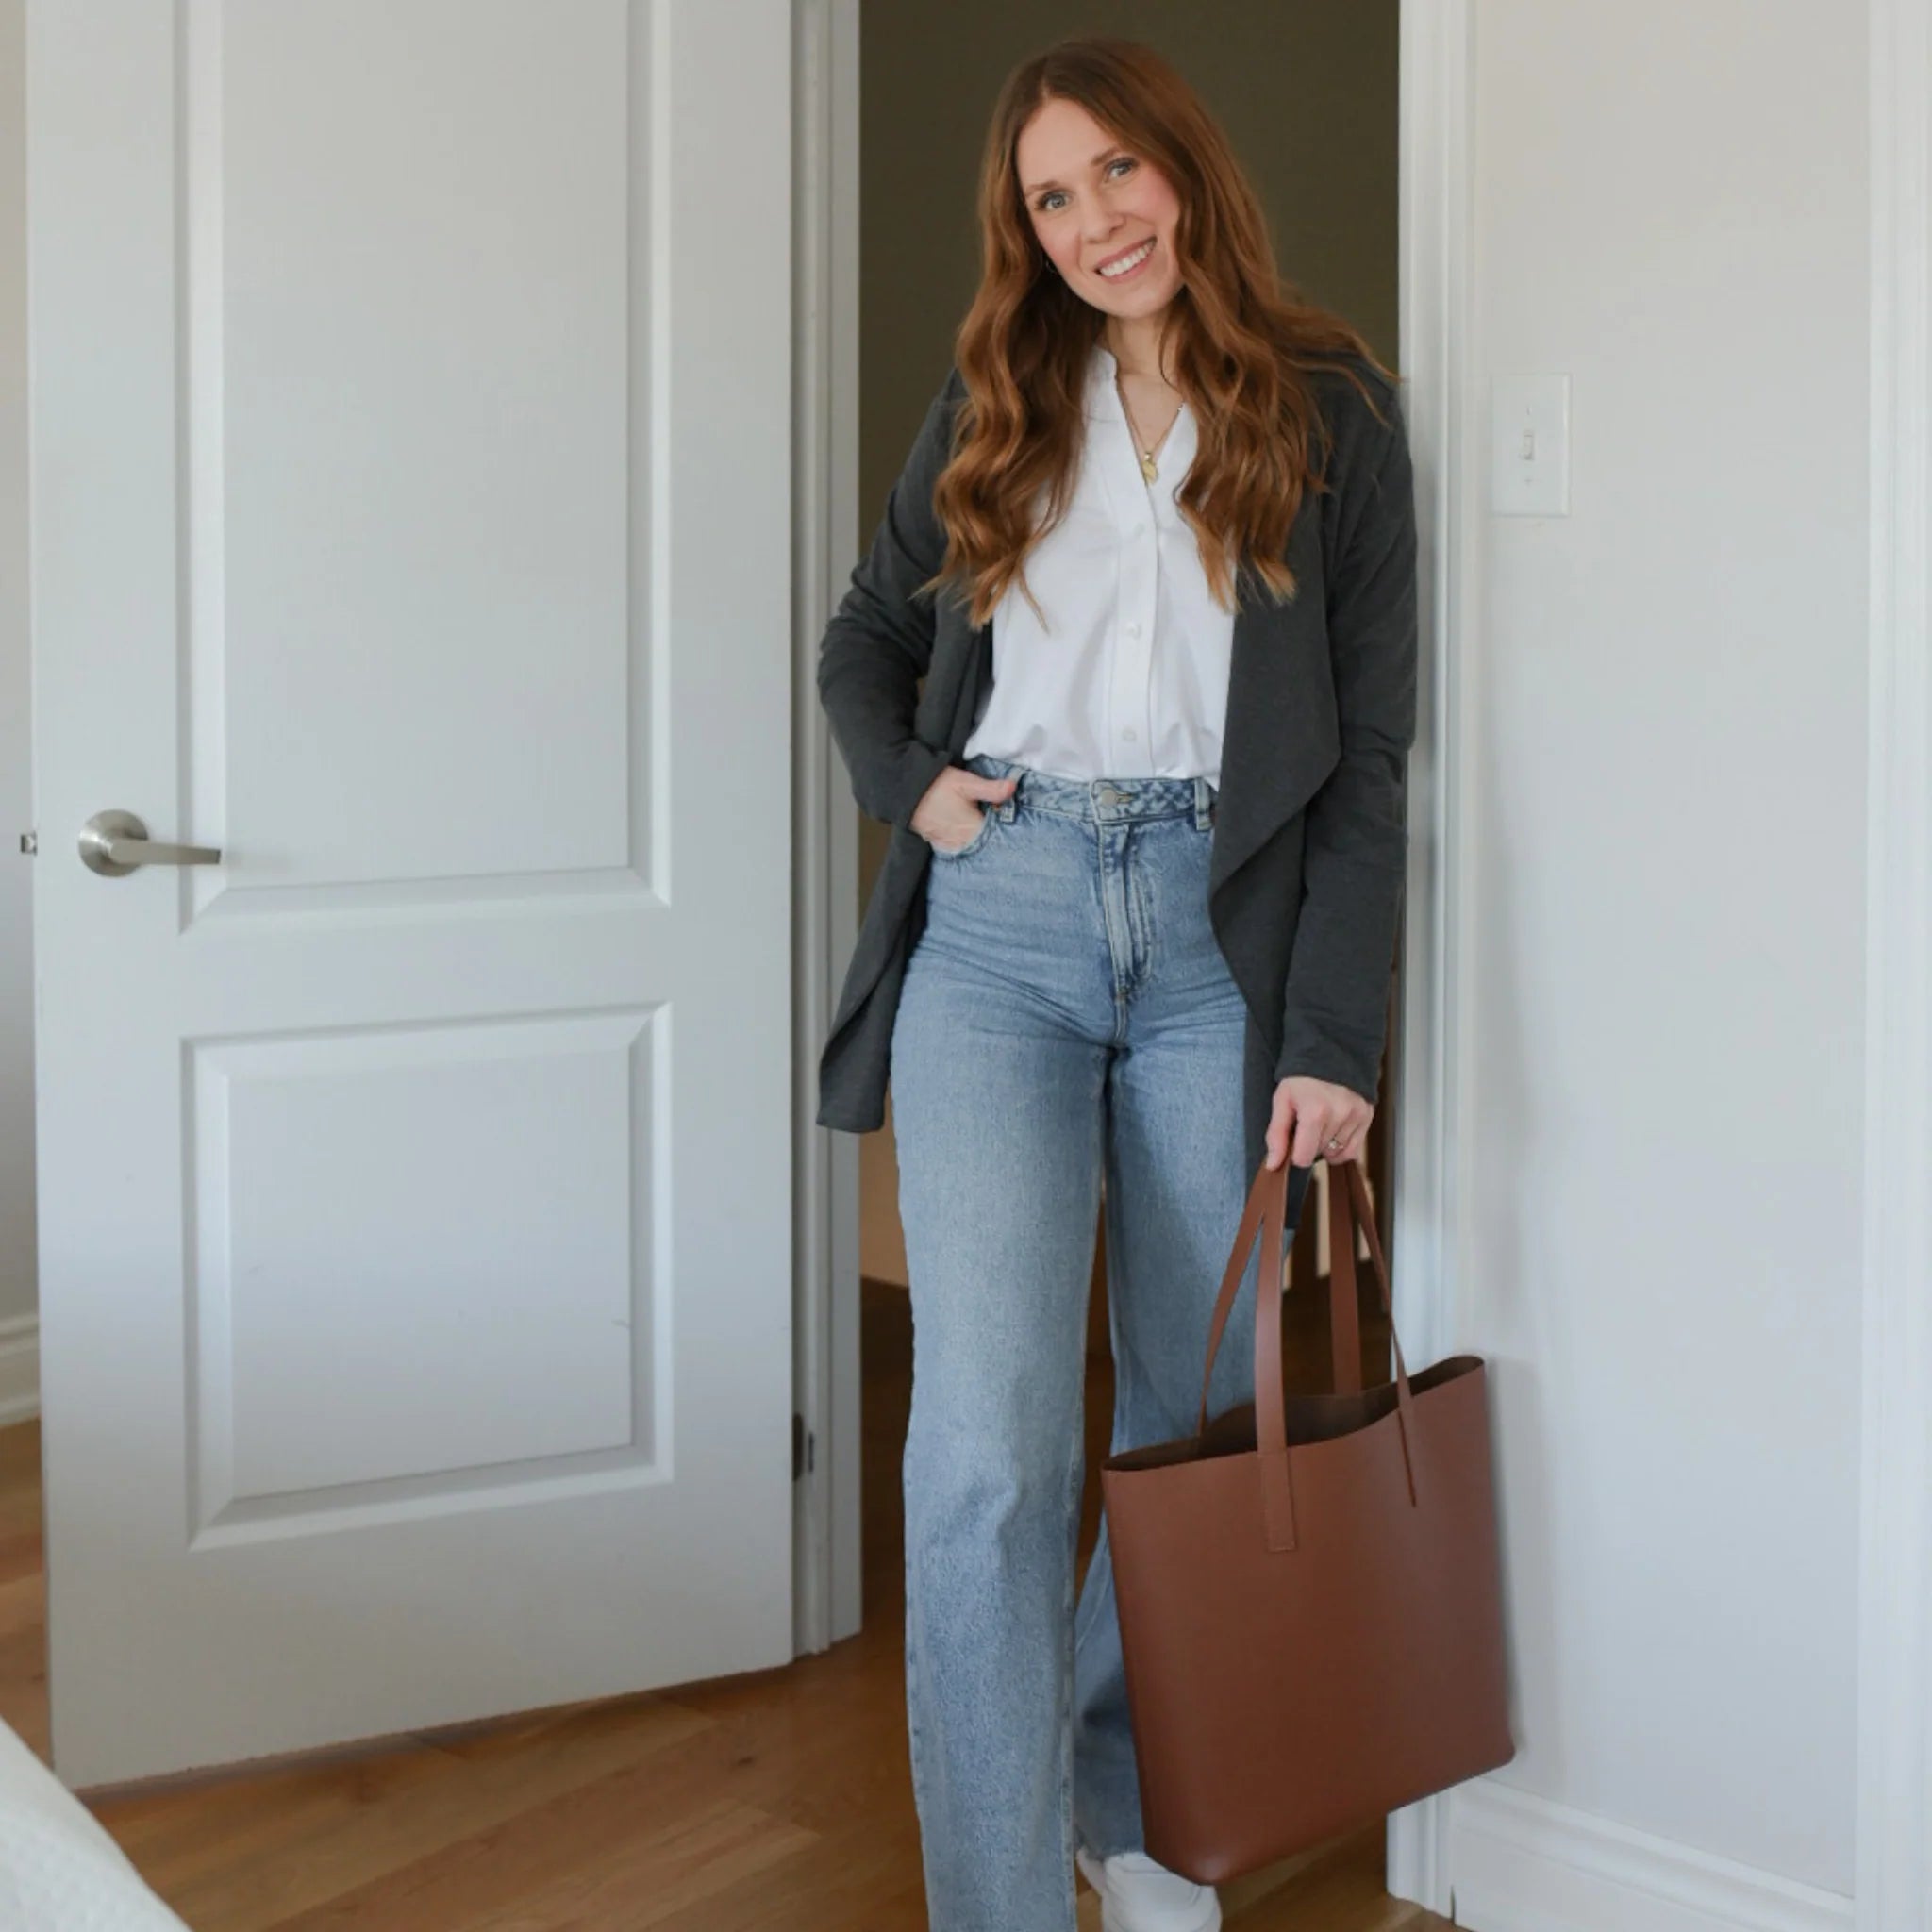 Woman wearing white long sleeve button up shirt with grey cardigan and jeans